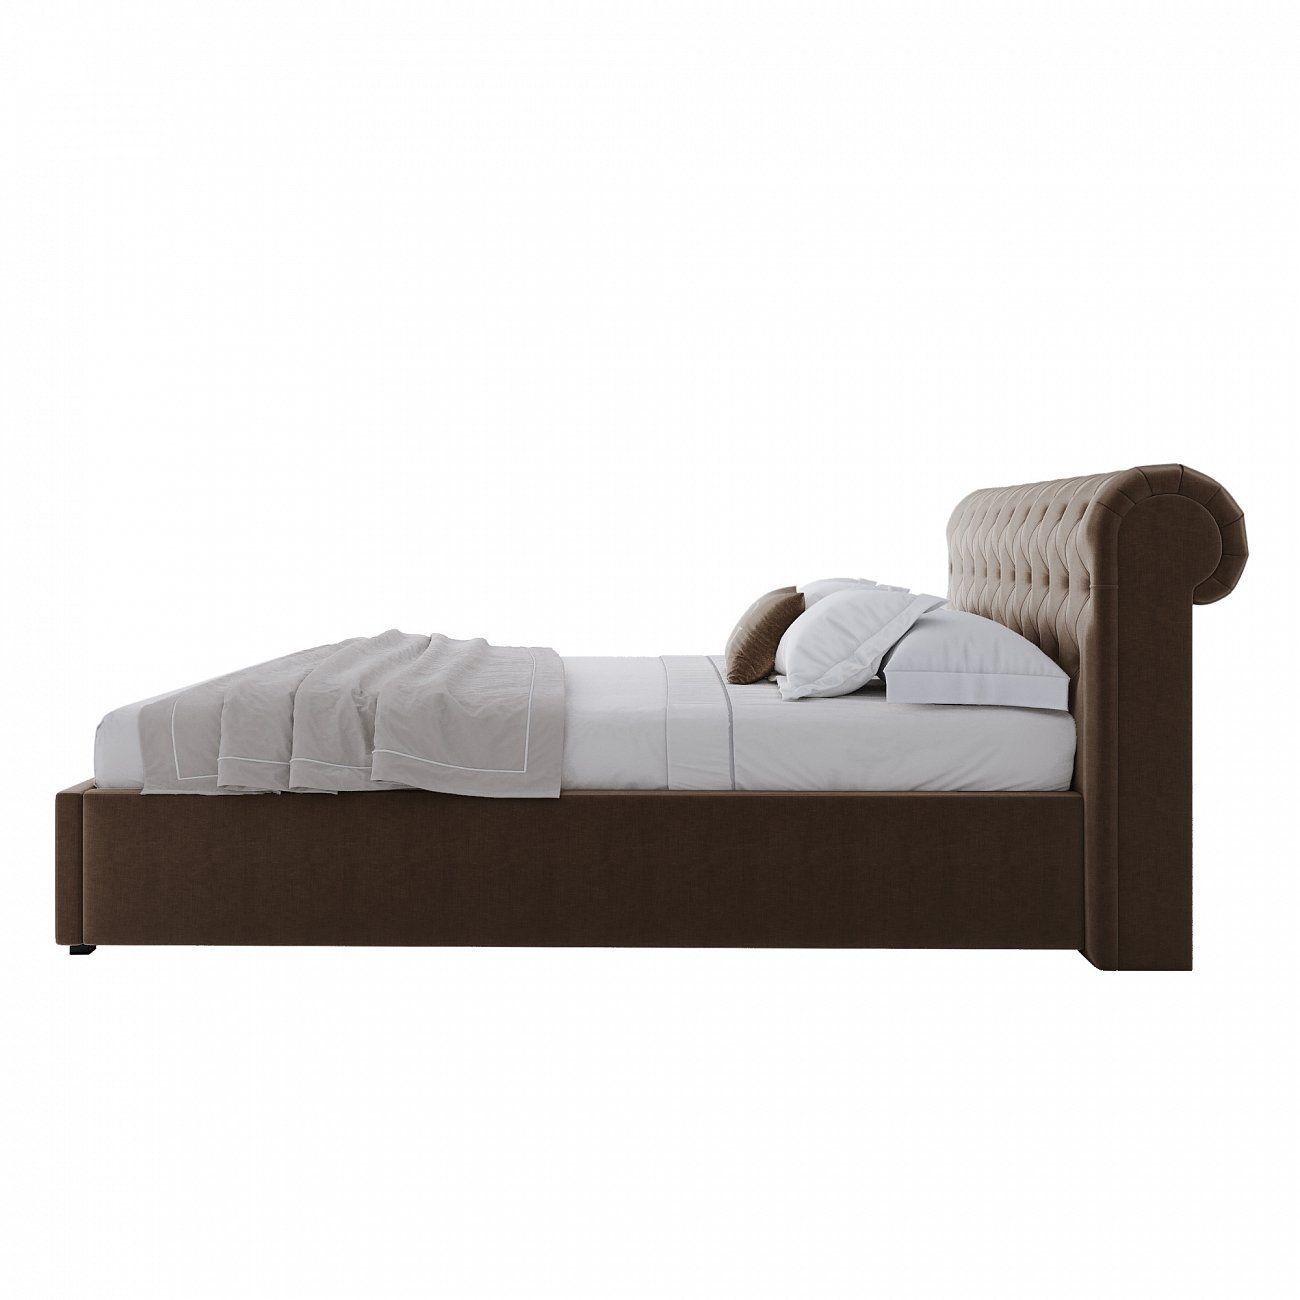 Teenage bed with carriage screed 140x200 brown Sweet Dreams